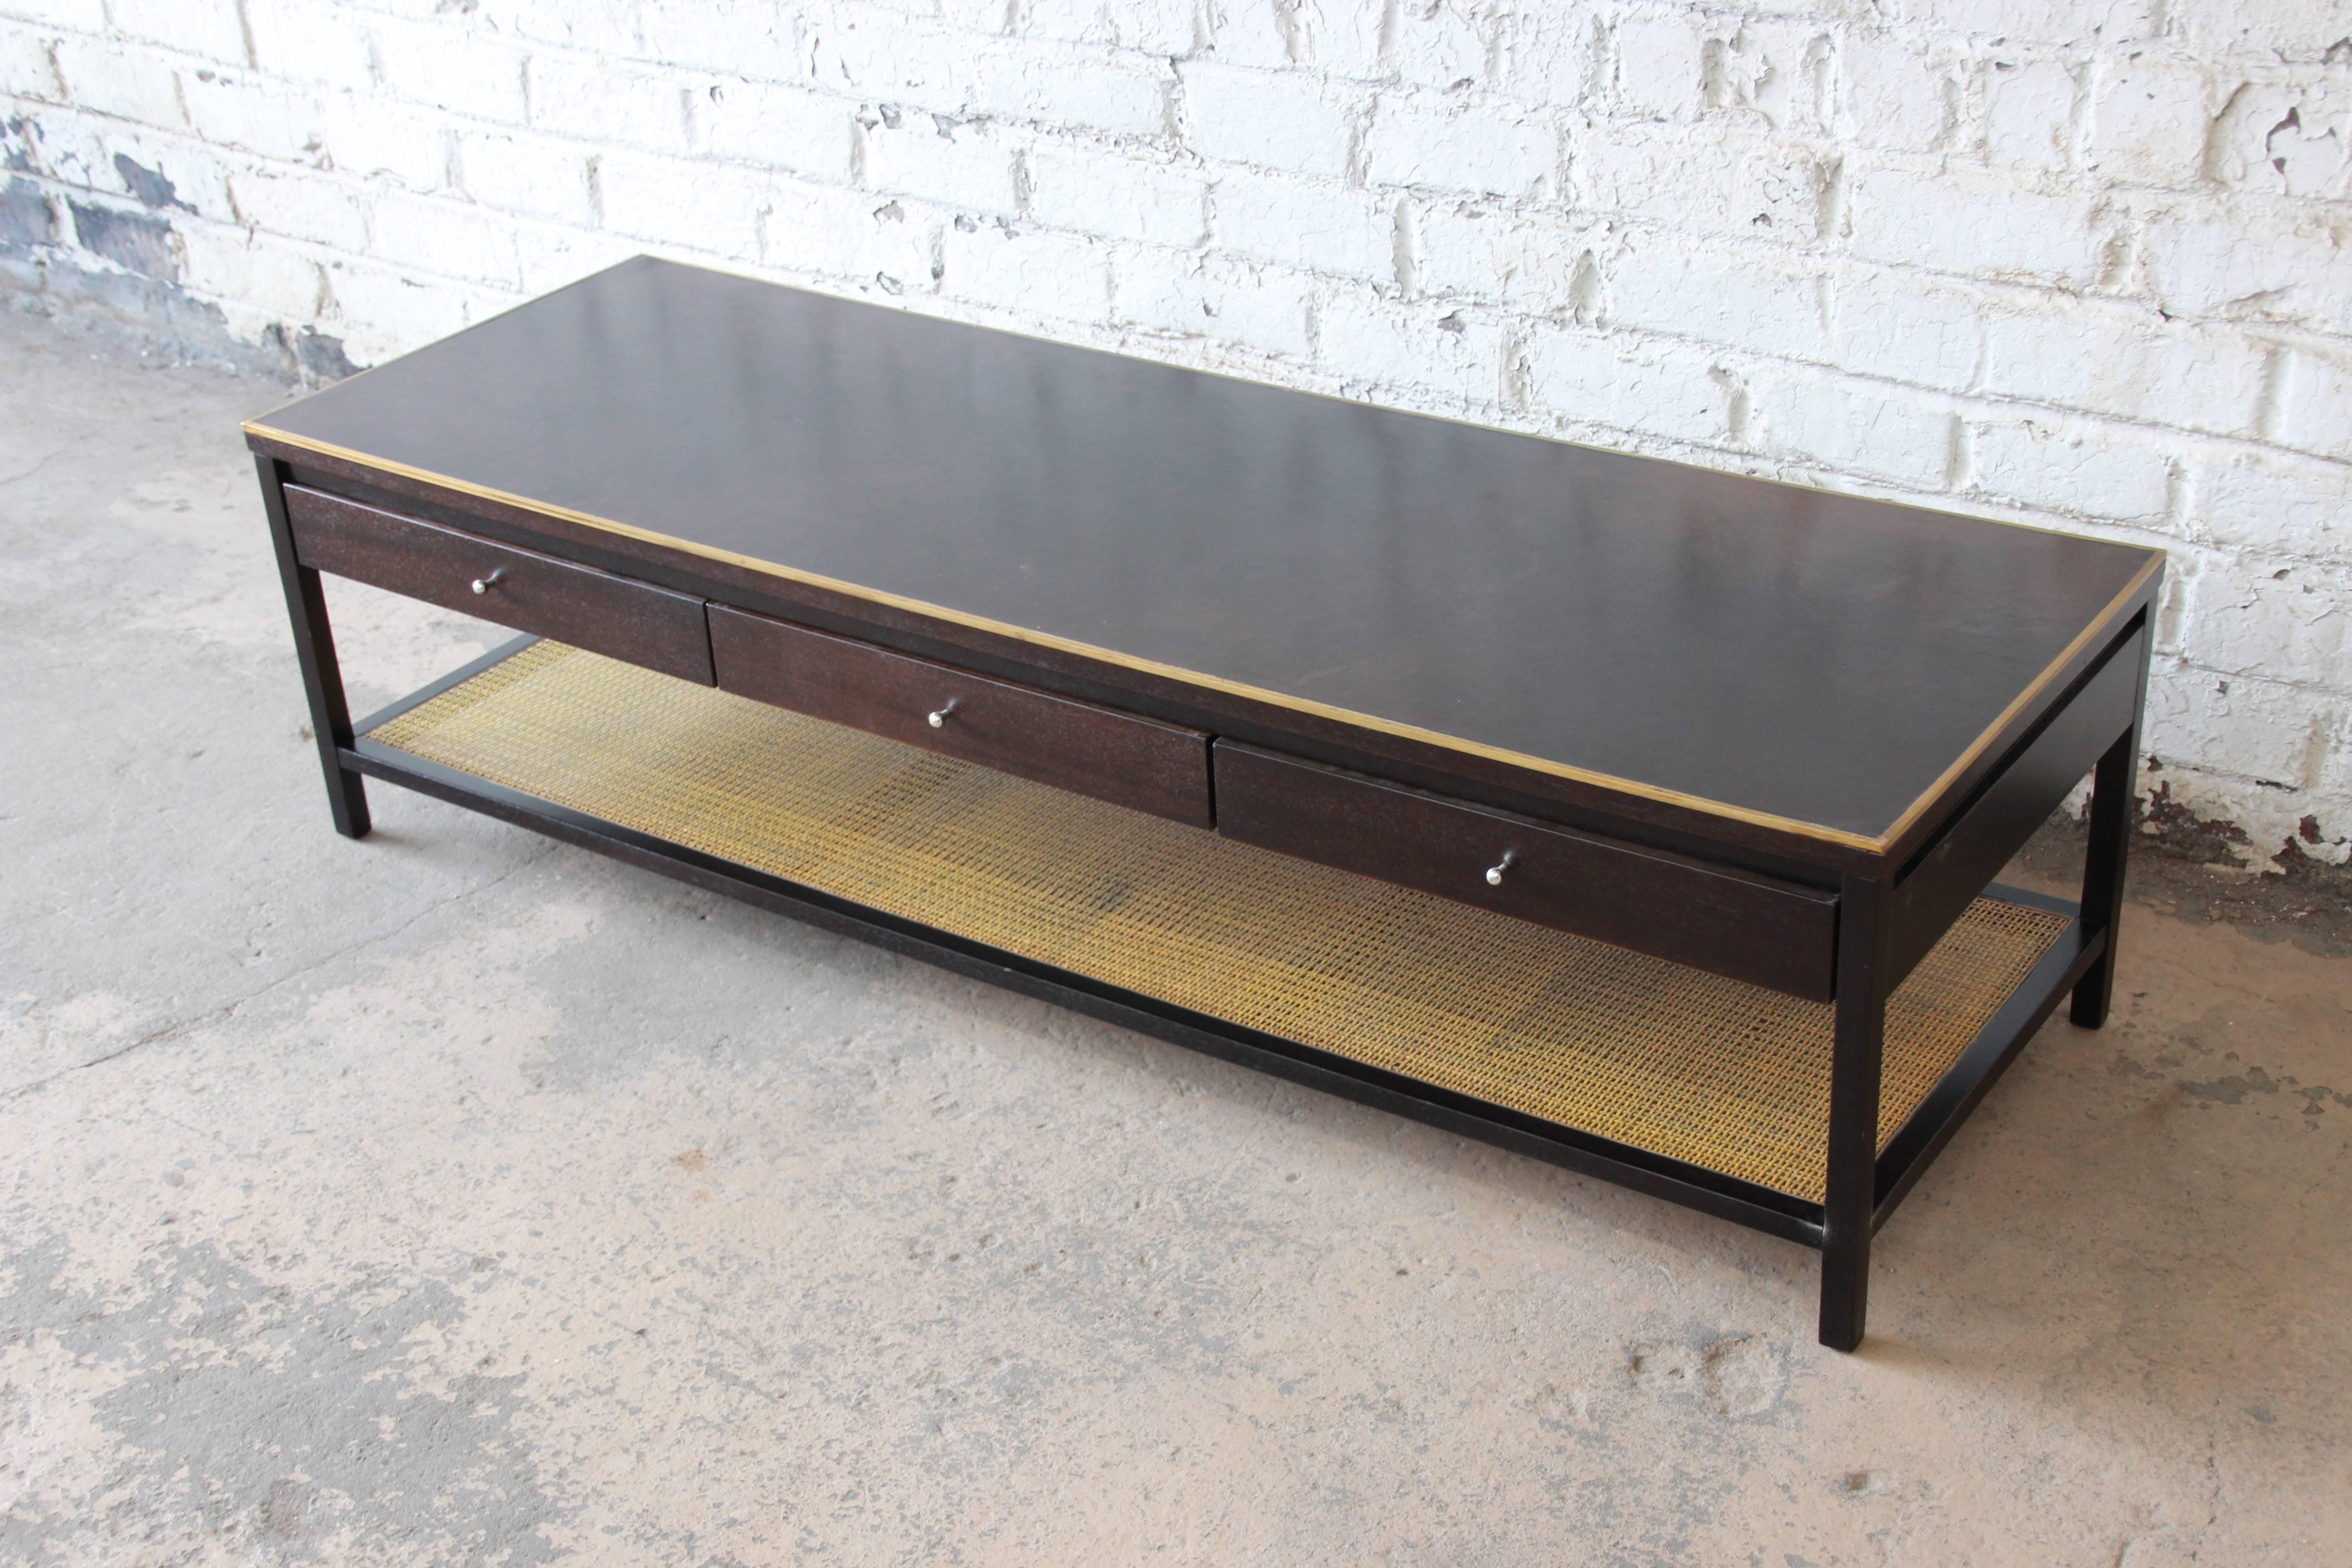 A rare and exceptional Mid-Century Modern two-tier coffee table designed by Paul McCobb for Calvin furniture's 